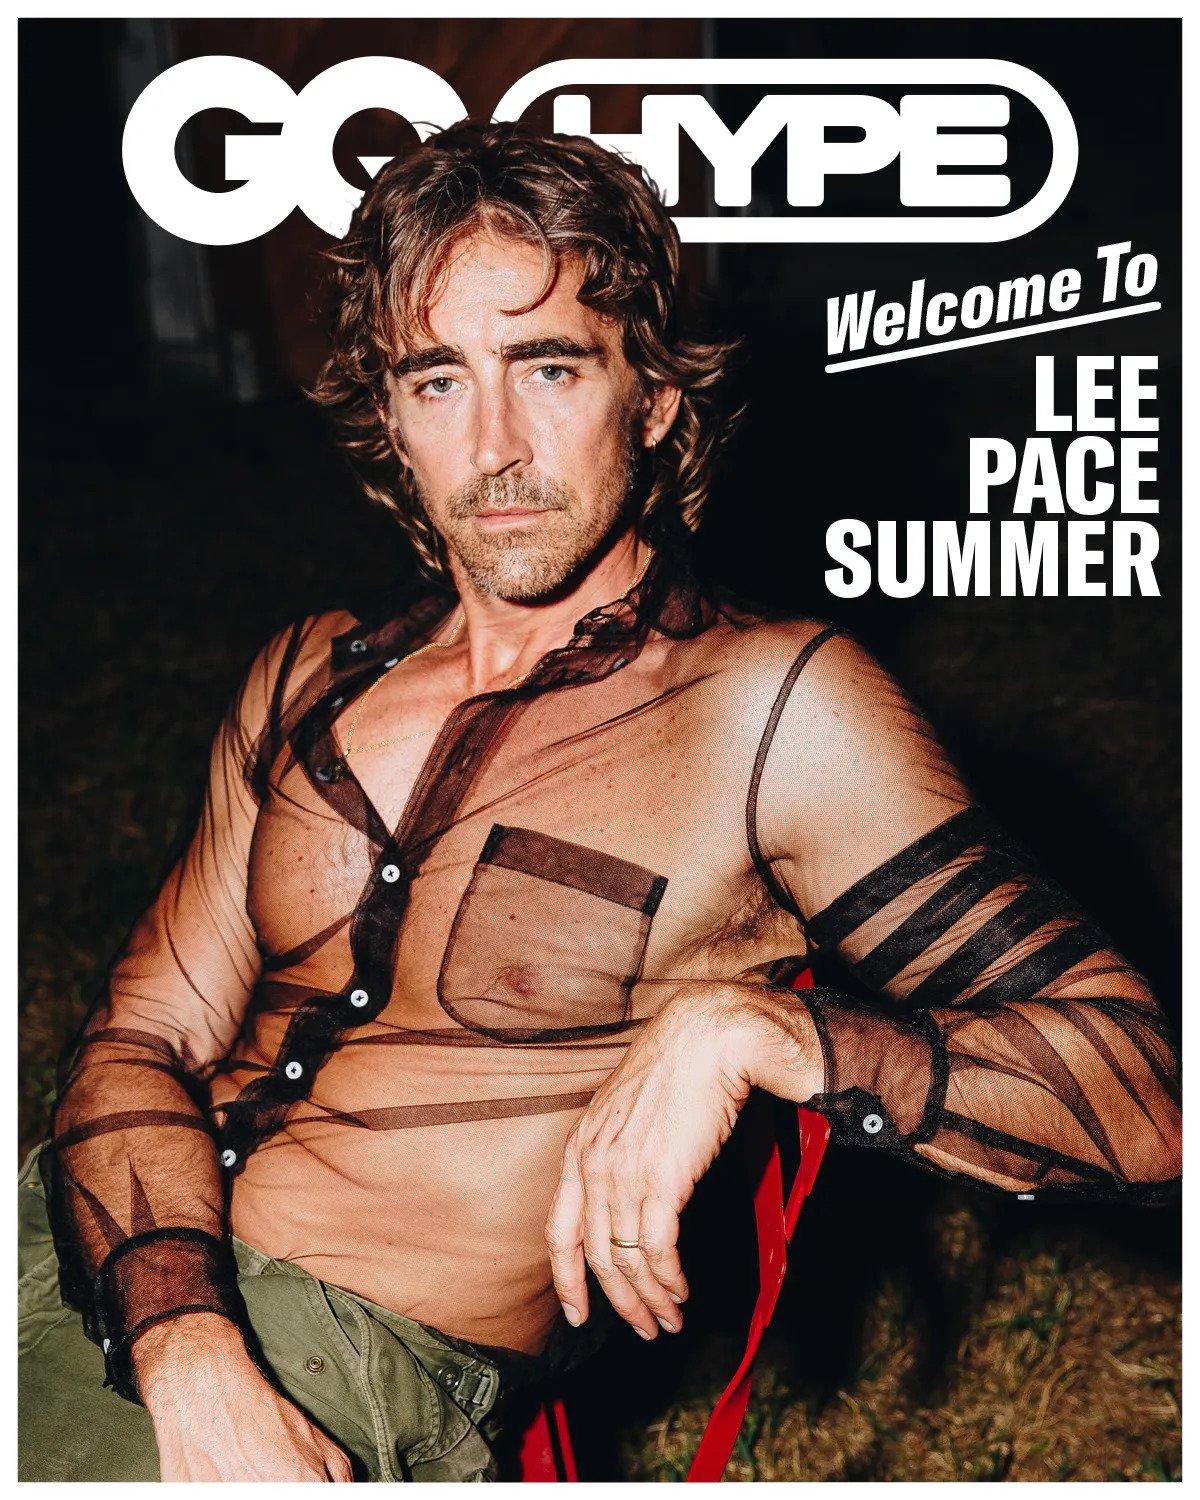 Lee Pace's Body of Work